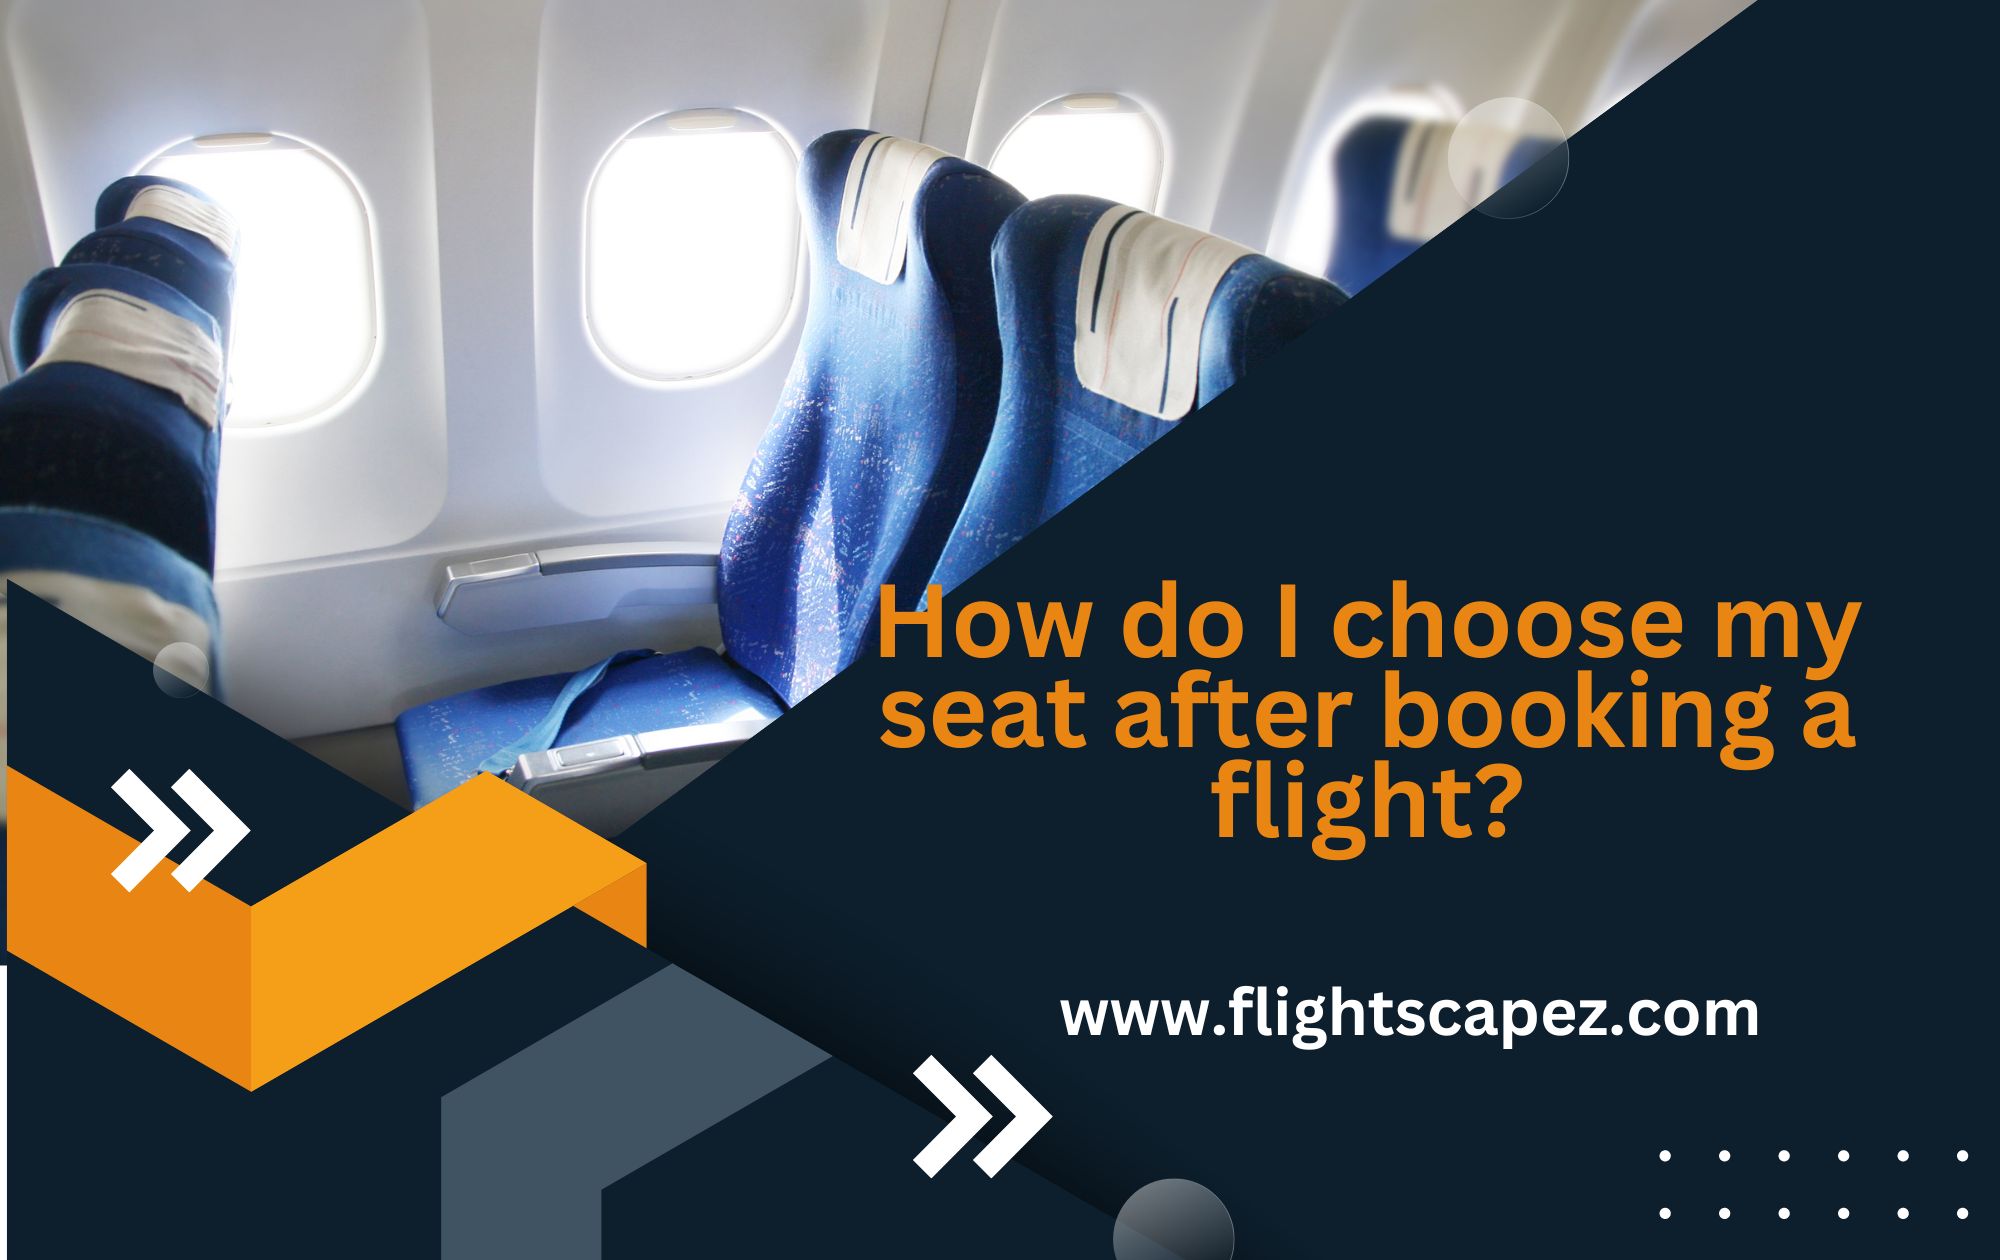 How do I choose my seat after booking a flight